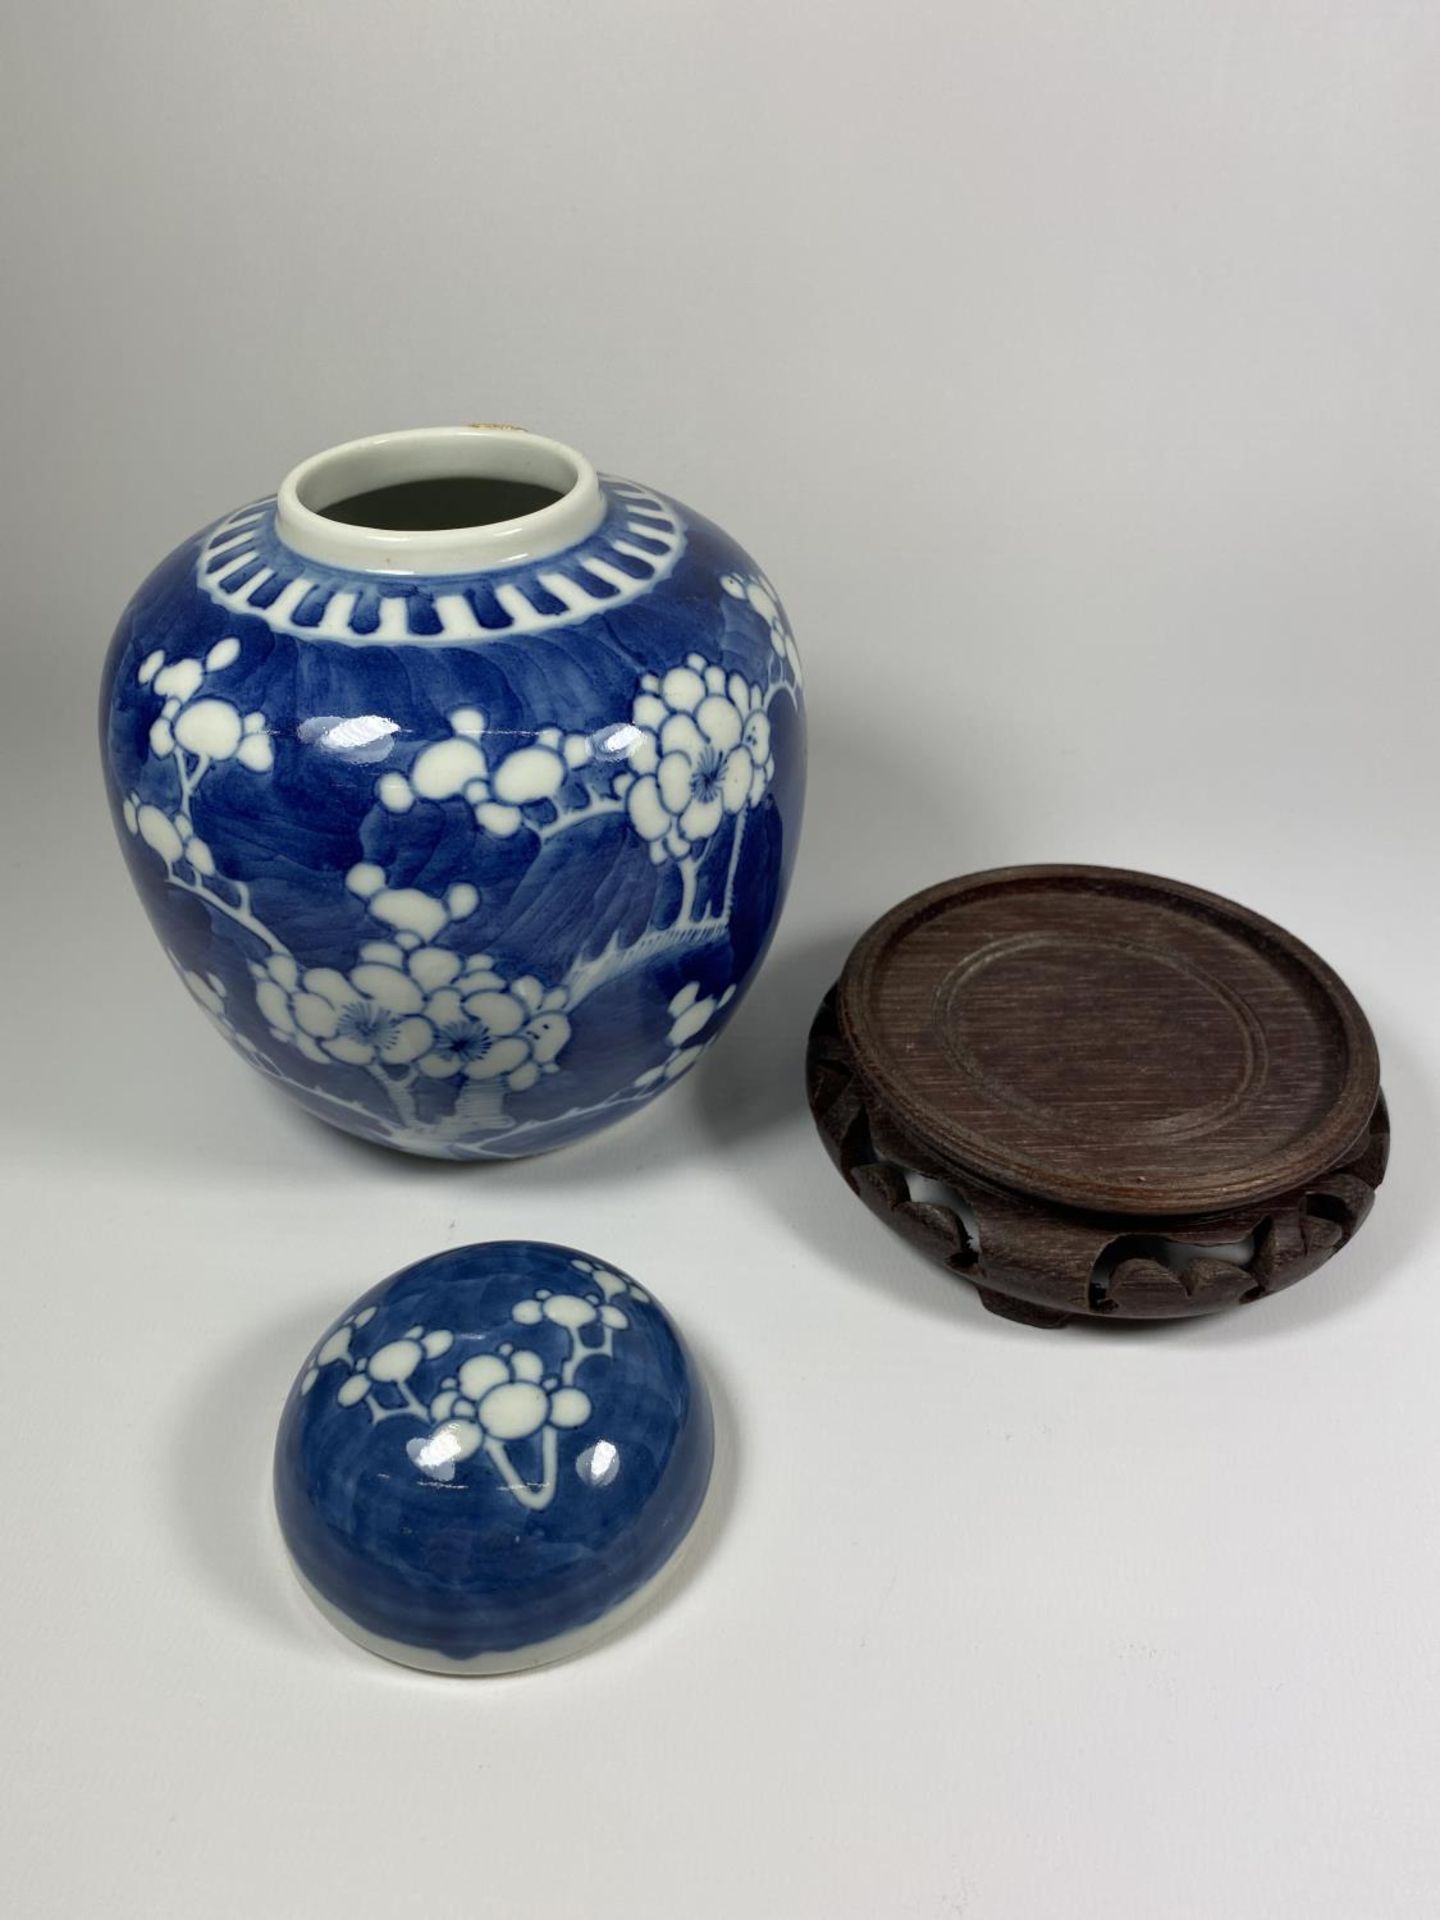 A LATE 19TH CENTURY CHINESE PORCELAIN PRUNUS BLOSSOM PATTERN GINGER JAR ON WOODEN BASE, DOUBLE - Image 2 of 5